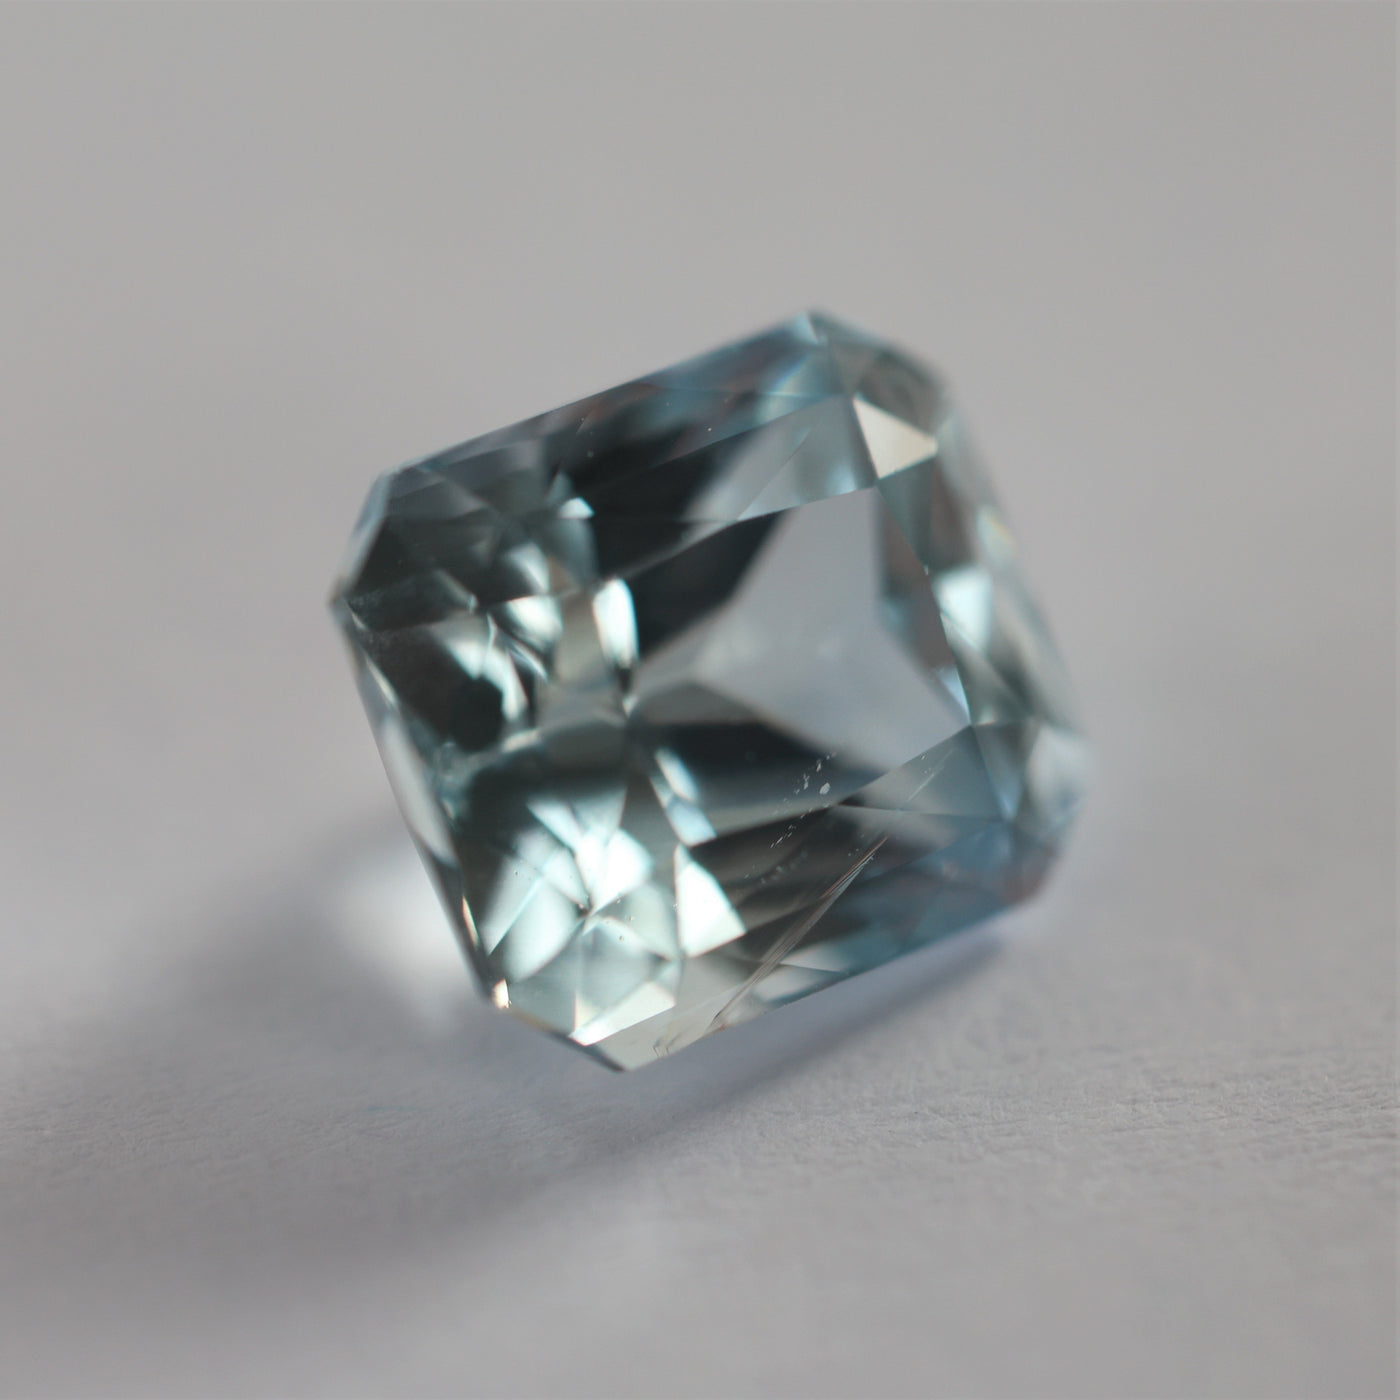 Loose octagon-shaped blue sapphire